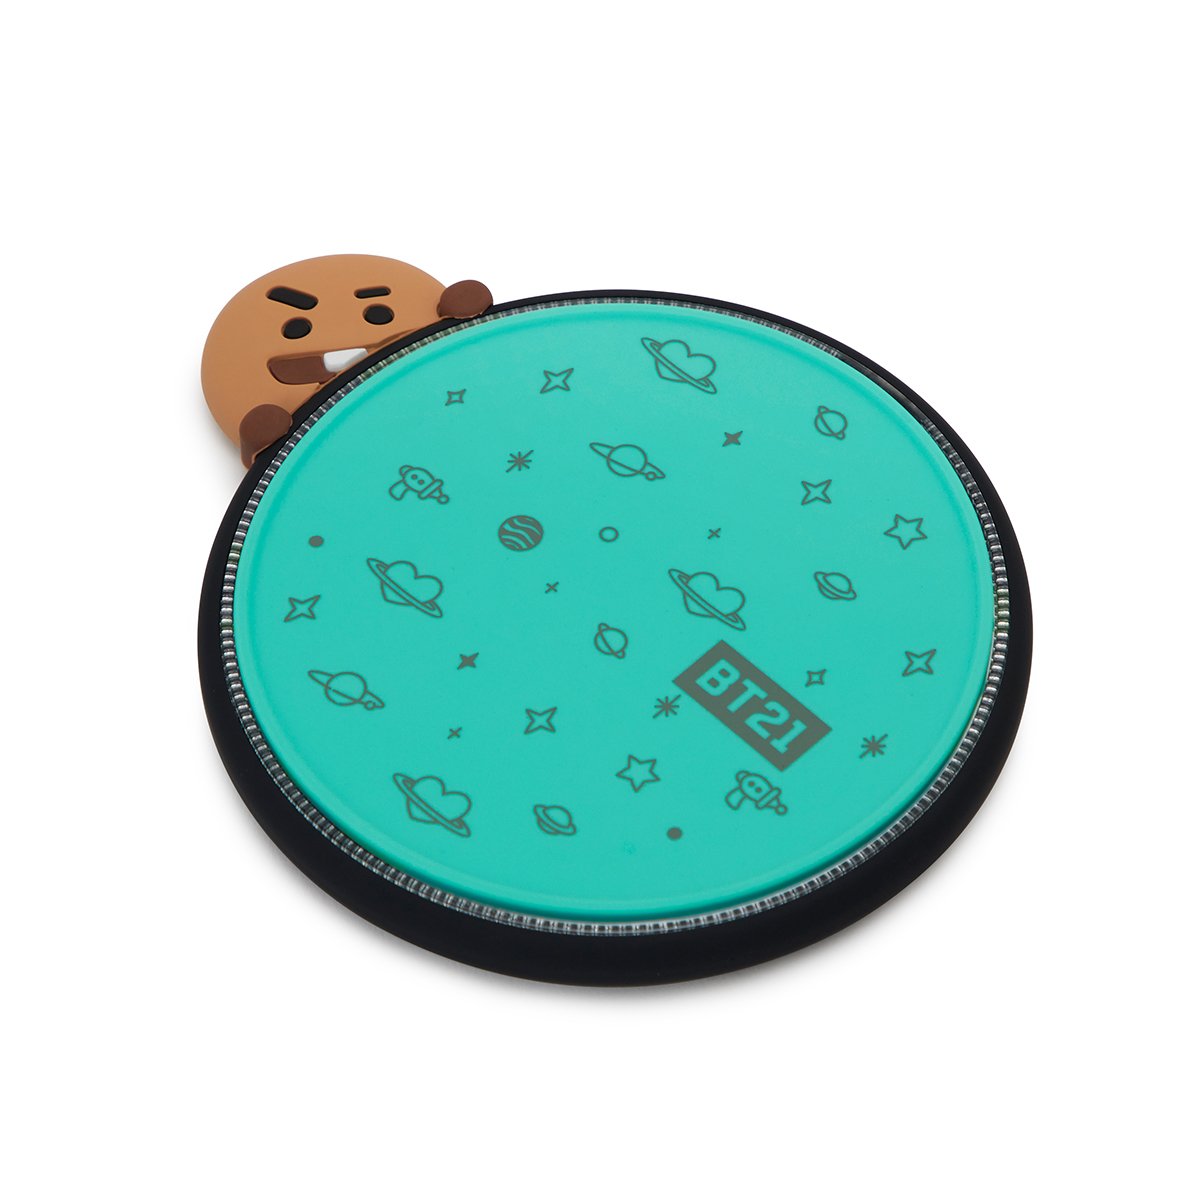 BT21 SHOOKY Wireless QI Phone Charger Pad